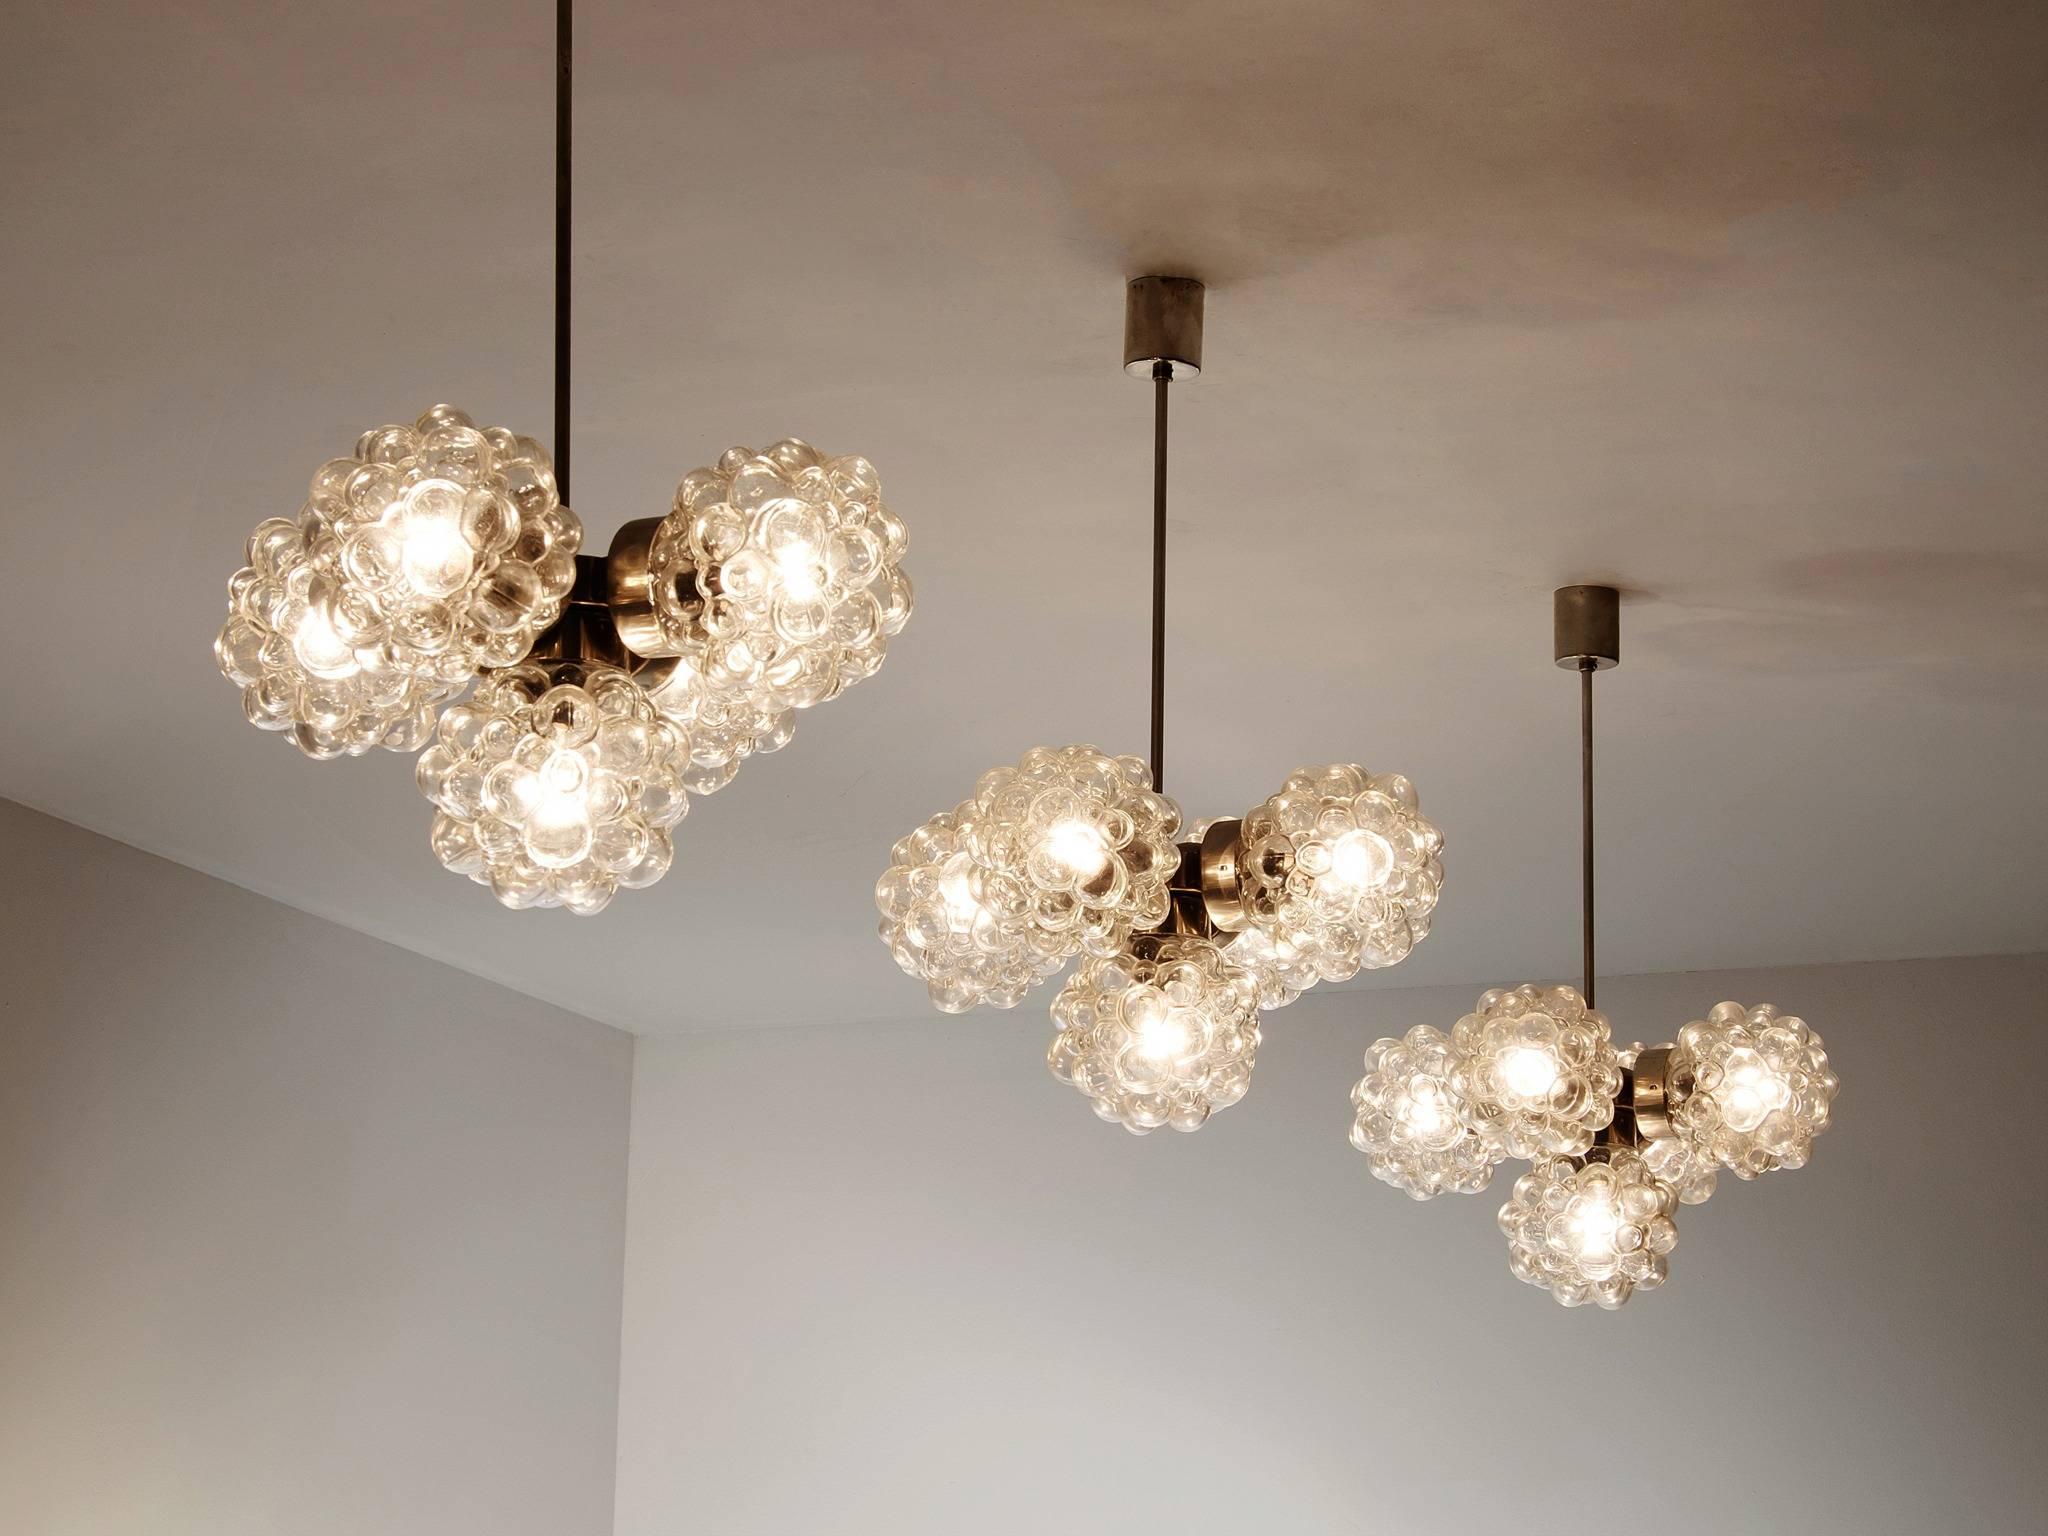 Helena Tynell, set of three pendants, metal and glass, Finland, 1970s. 

Large set of structured glass chandeliers. Each light has five spheres, which makes sure the light gets nicely divided over the room. The structured glass creates an